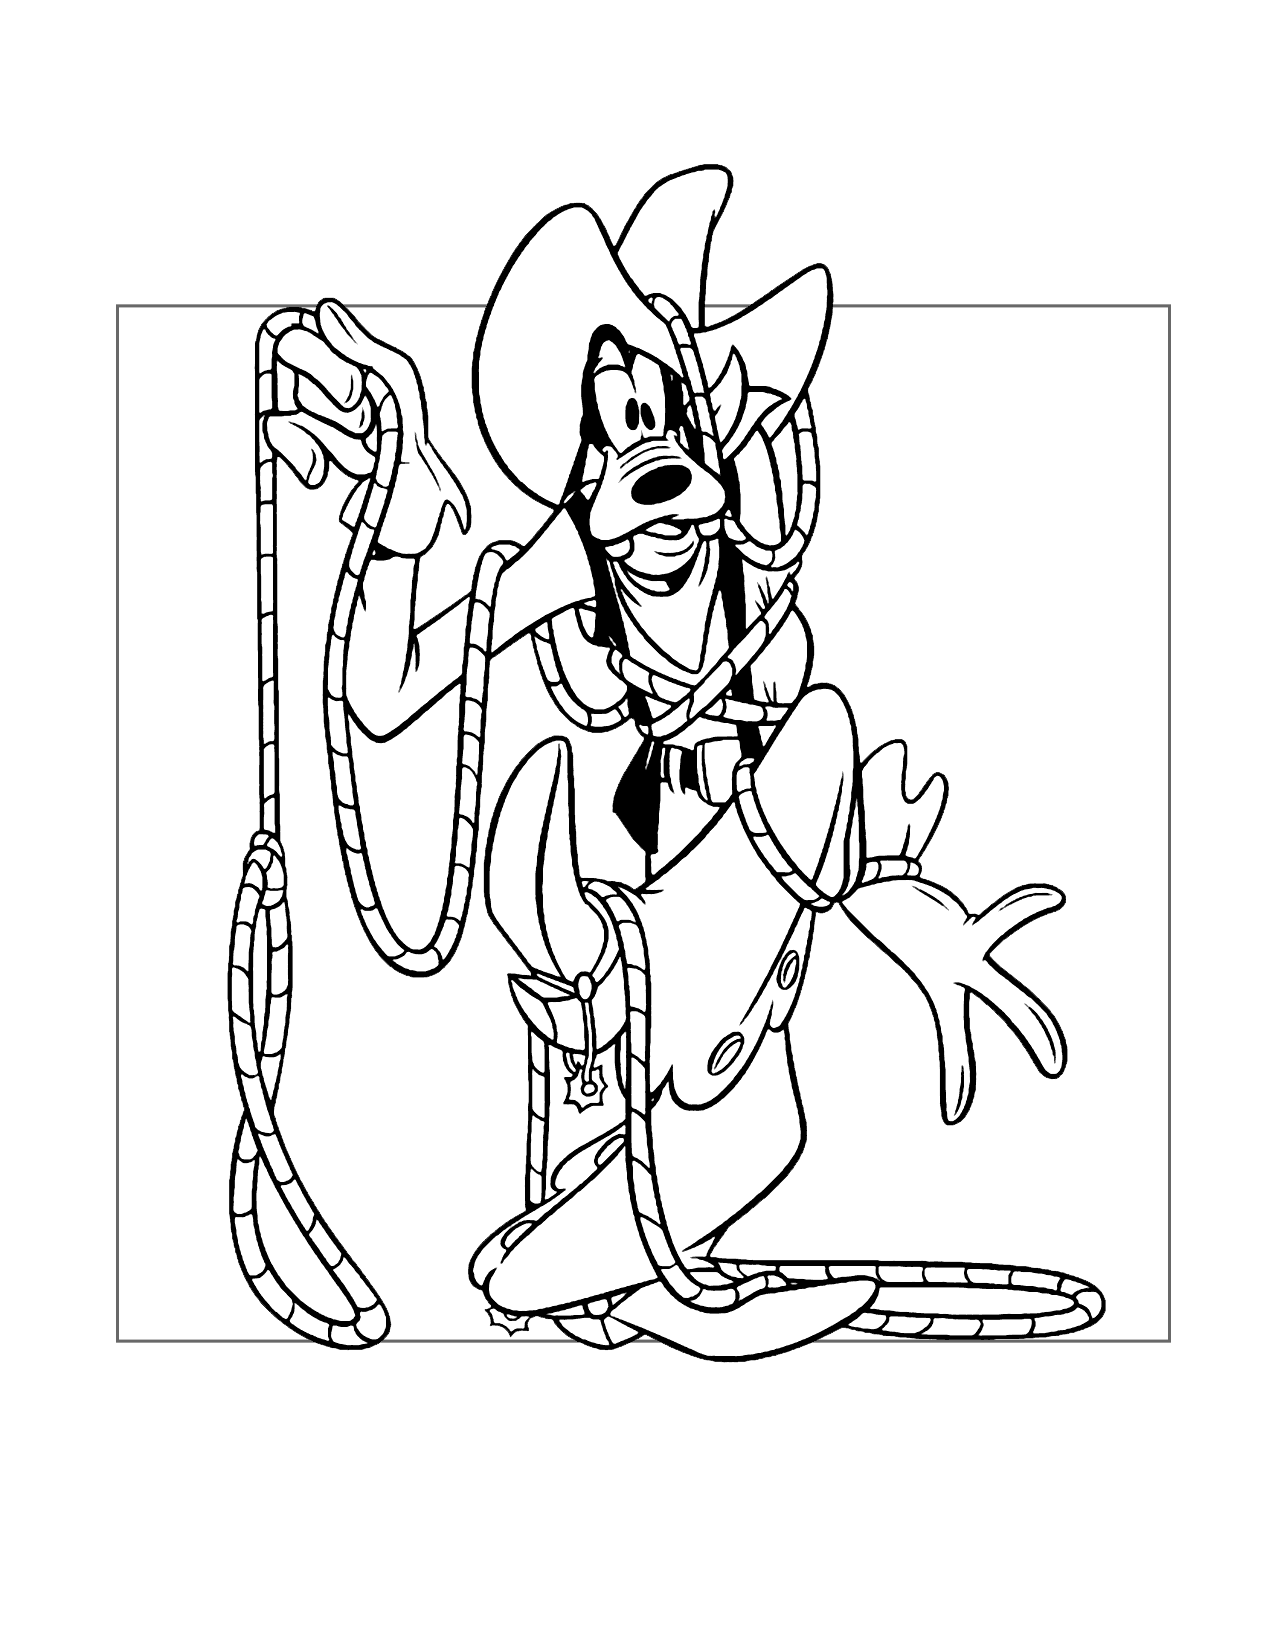 Cowboy Goofy Roped Himself Coloring Page